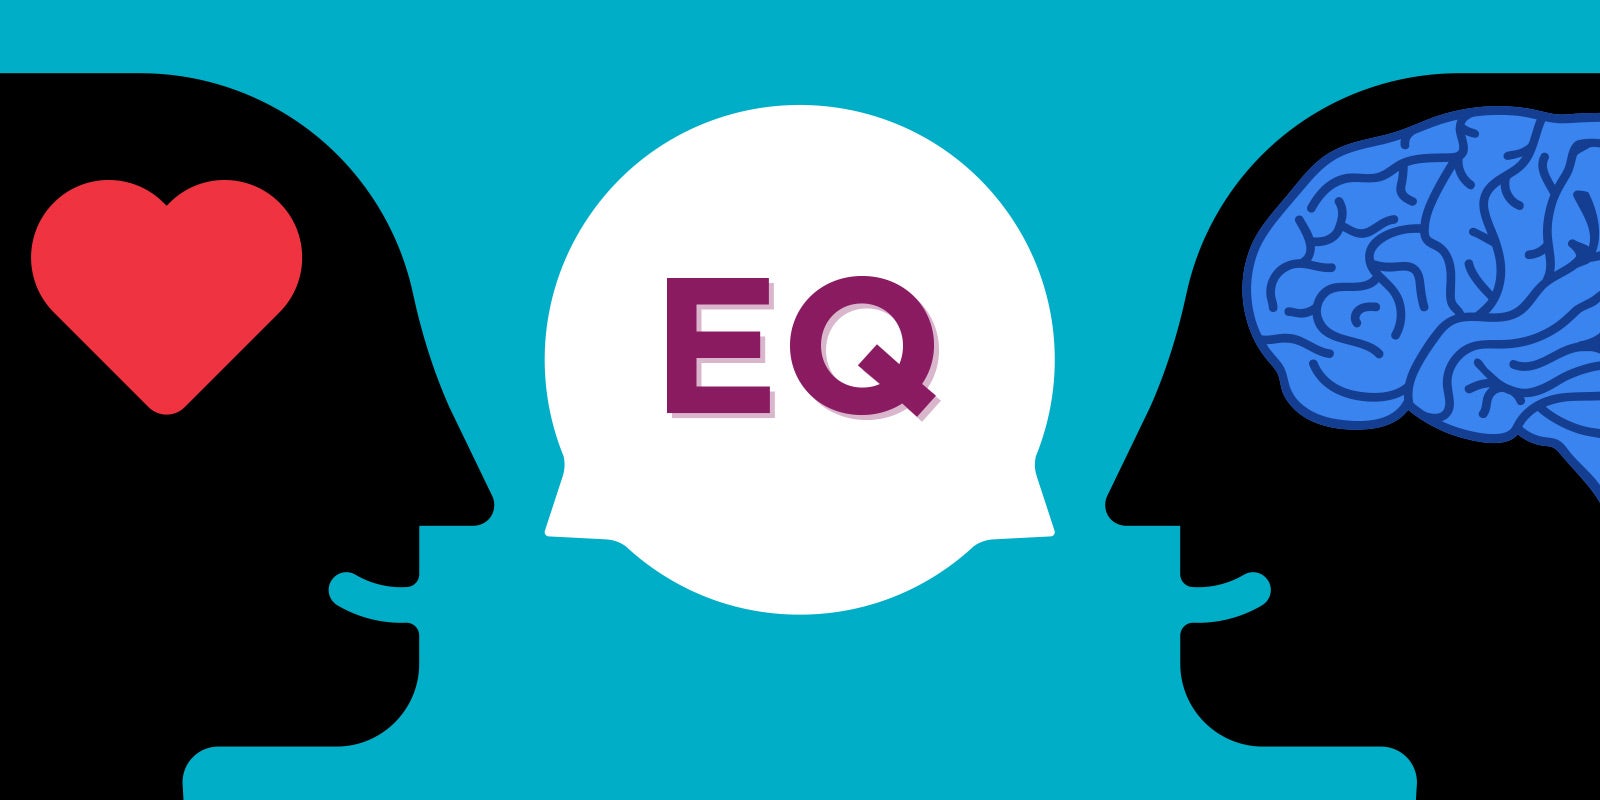 illustration of two heads, one on the left with a heart in the brain area, and the one on the right with just their brain, and in the middle is a word bubble with the word "EQ" in it, coming from each of the heads' mouths to show this post is about why emotional intelligence in leadership is important and emotional intelligence competencies for leaders